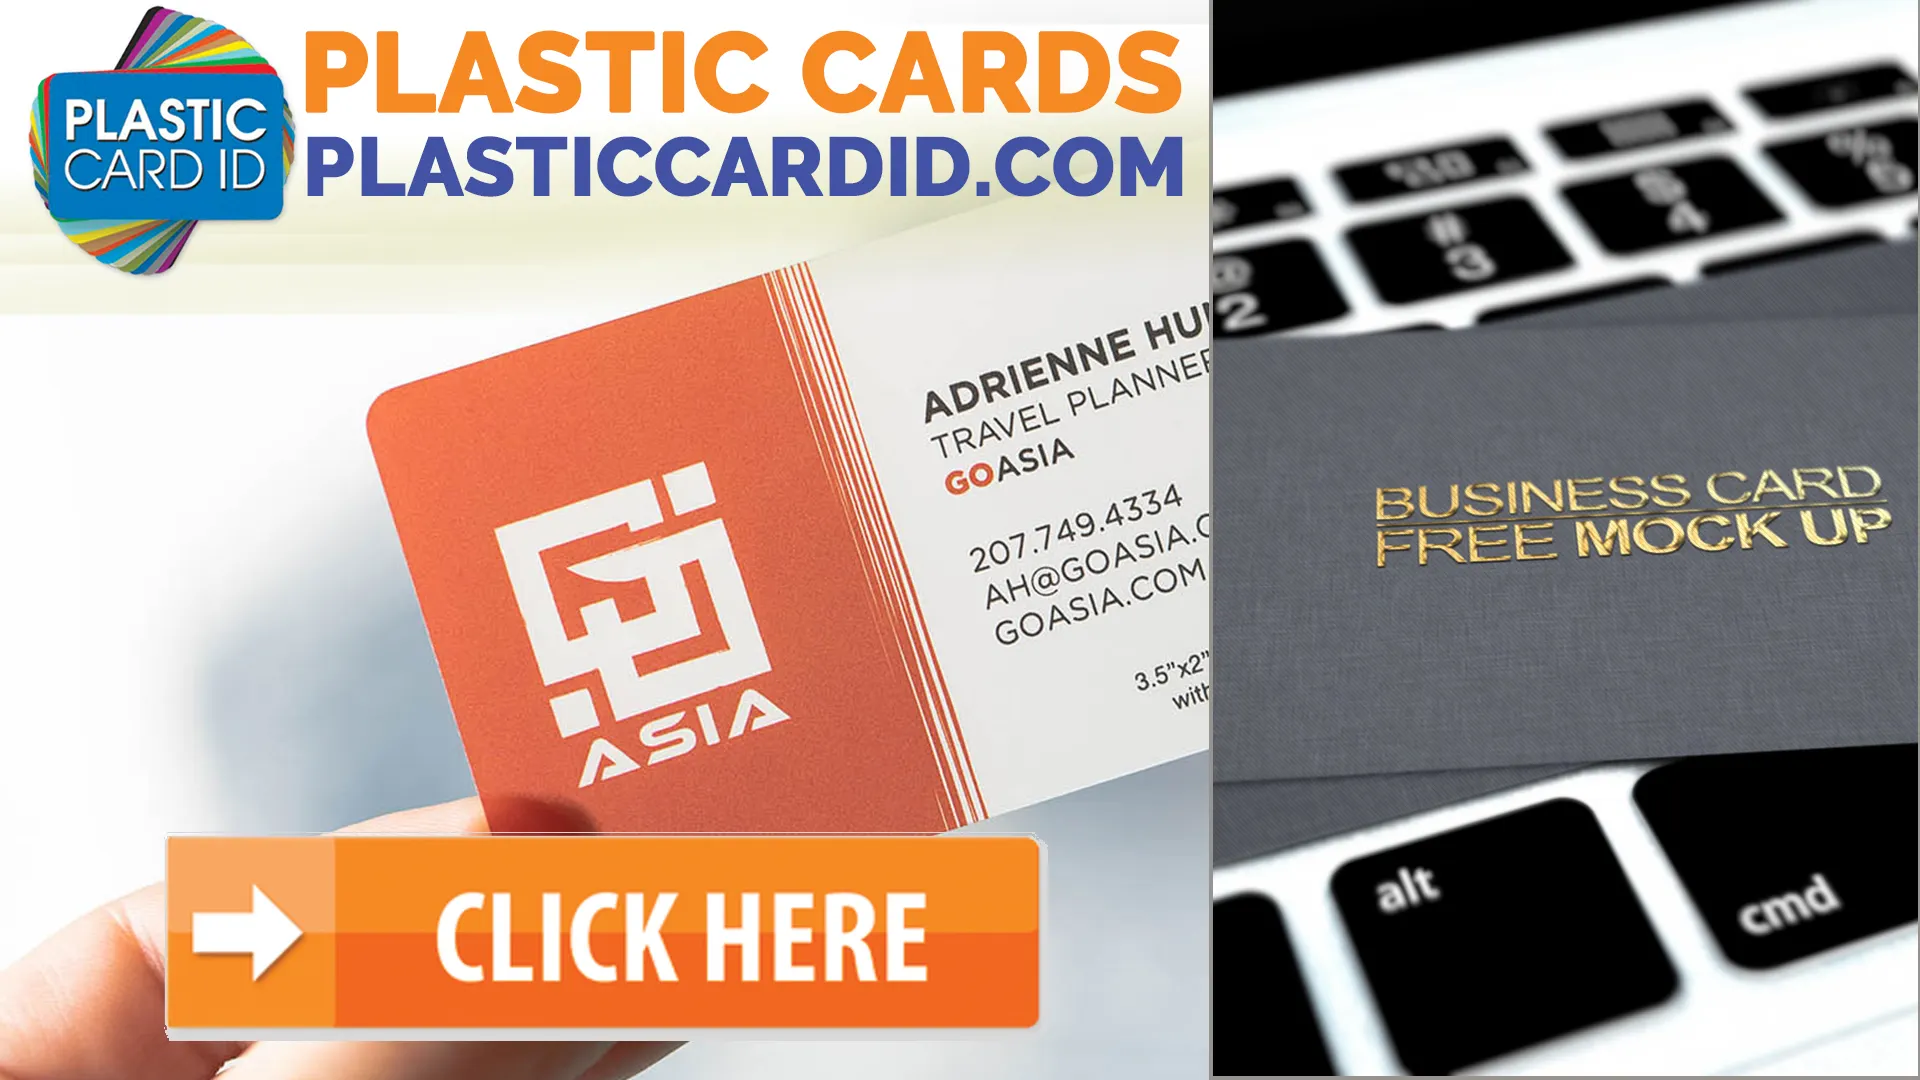 Plastic Card ID
's Advanced Security Features